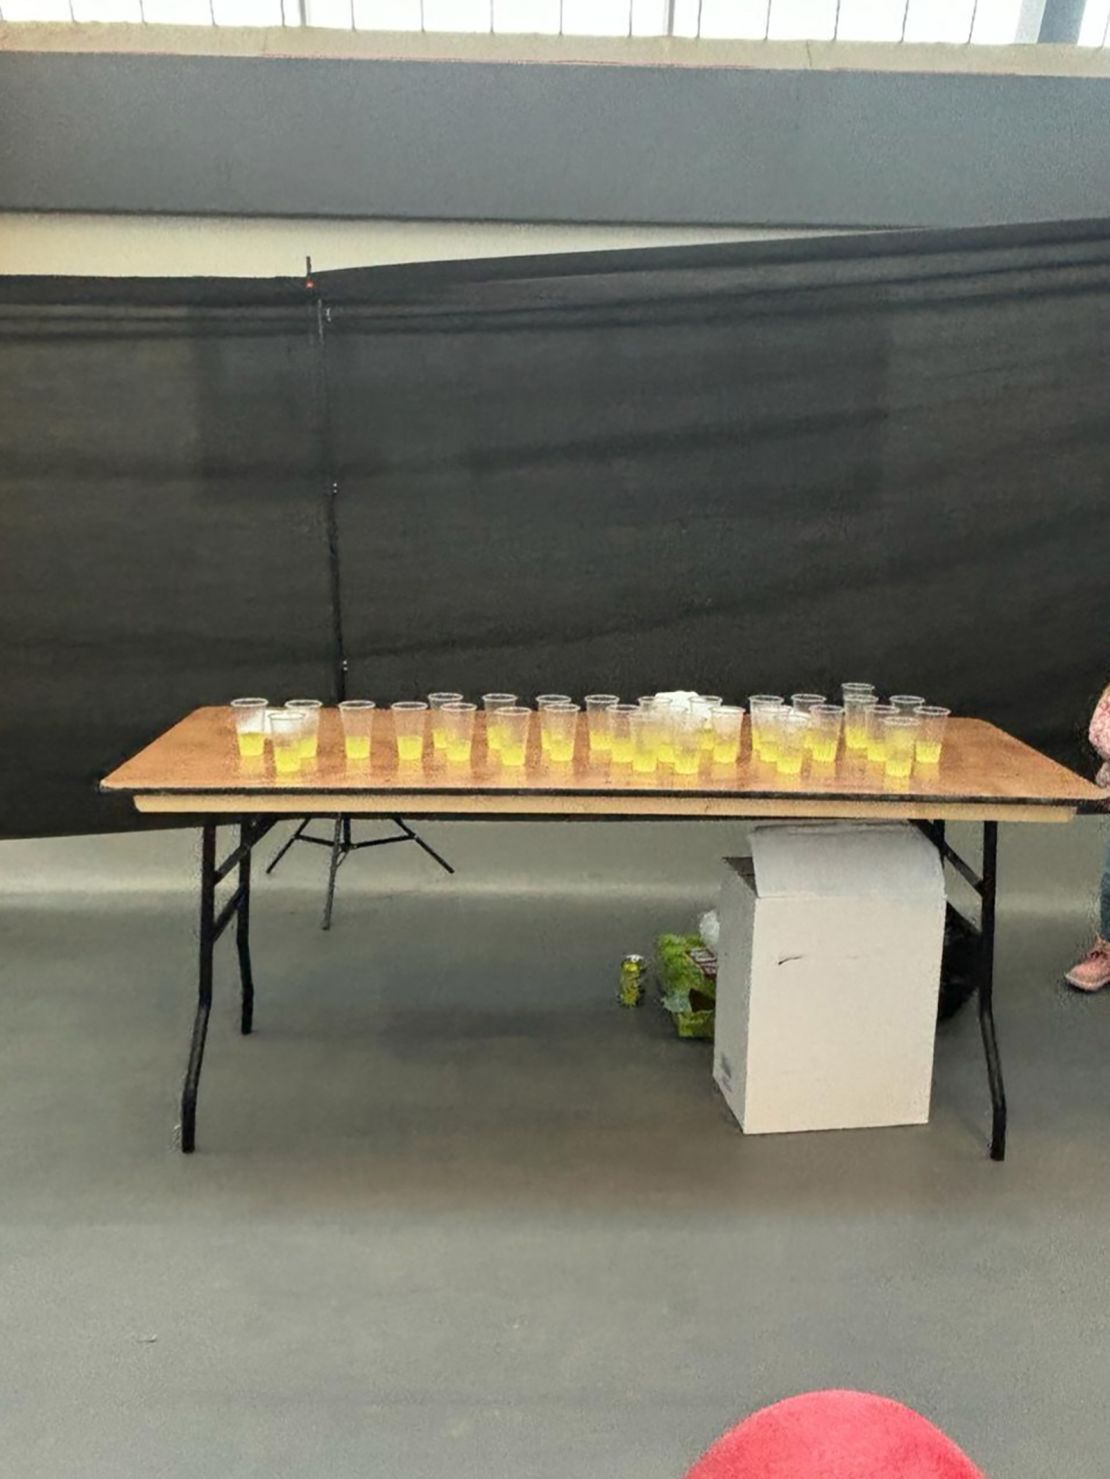 Each child was given a quarter of a cup of lemonade and one or two jelly beans.